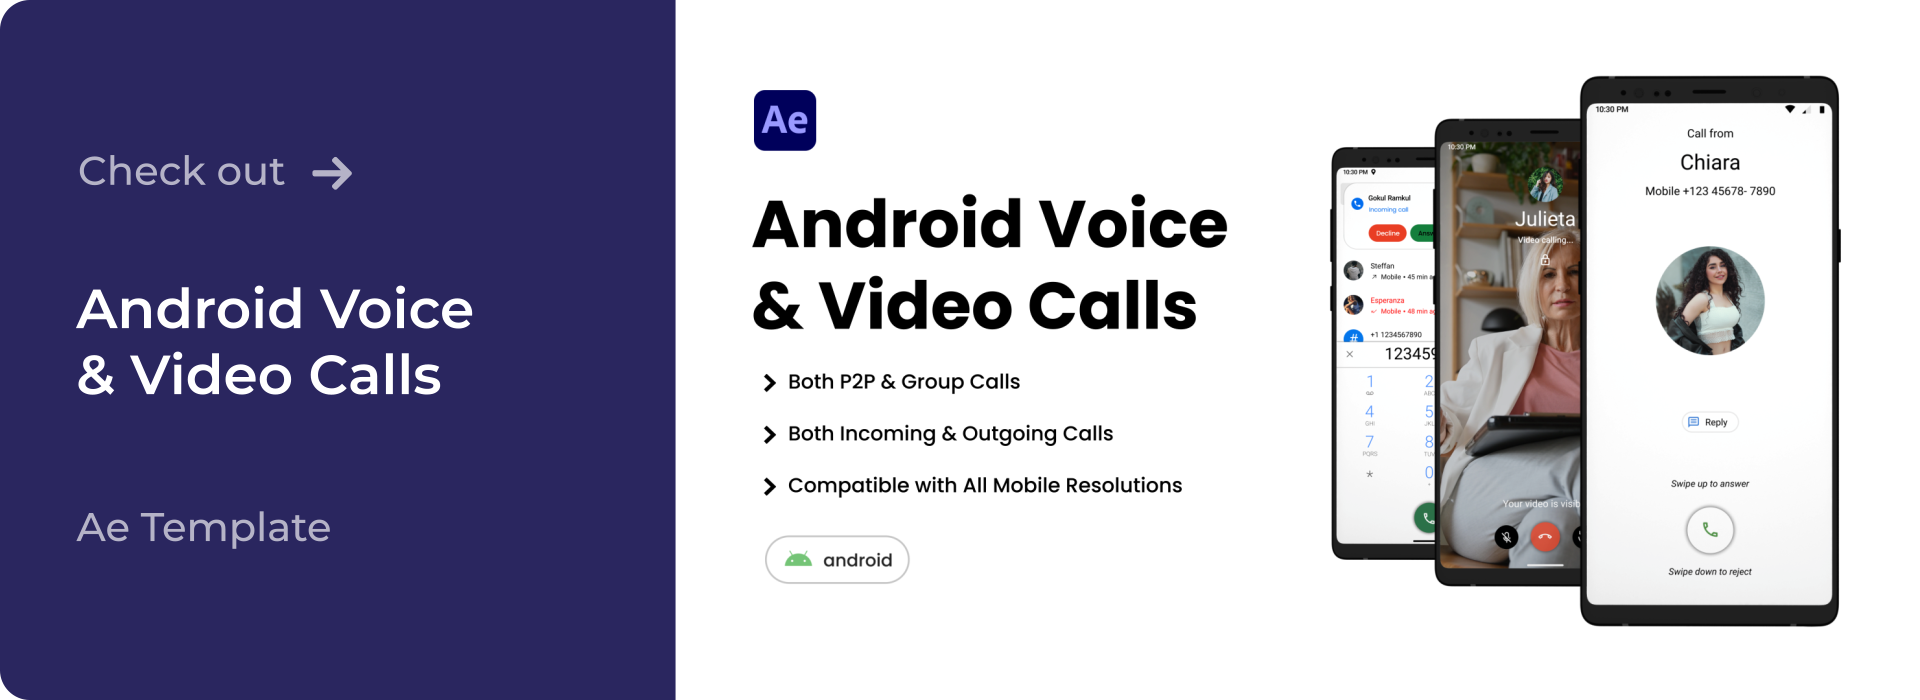 Check out Android Calls AE Template